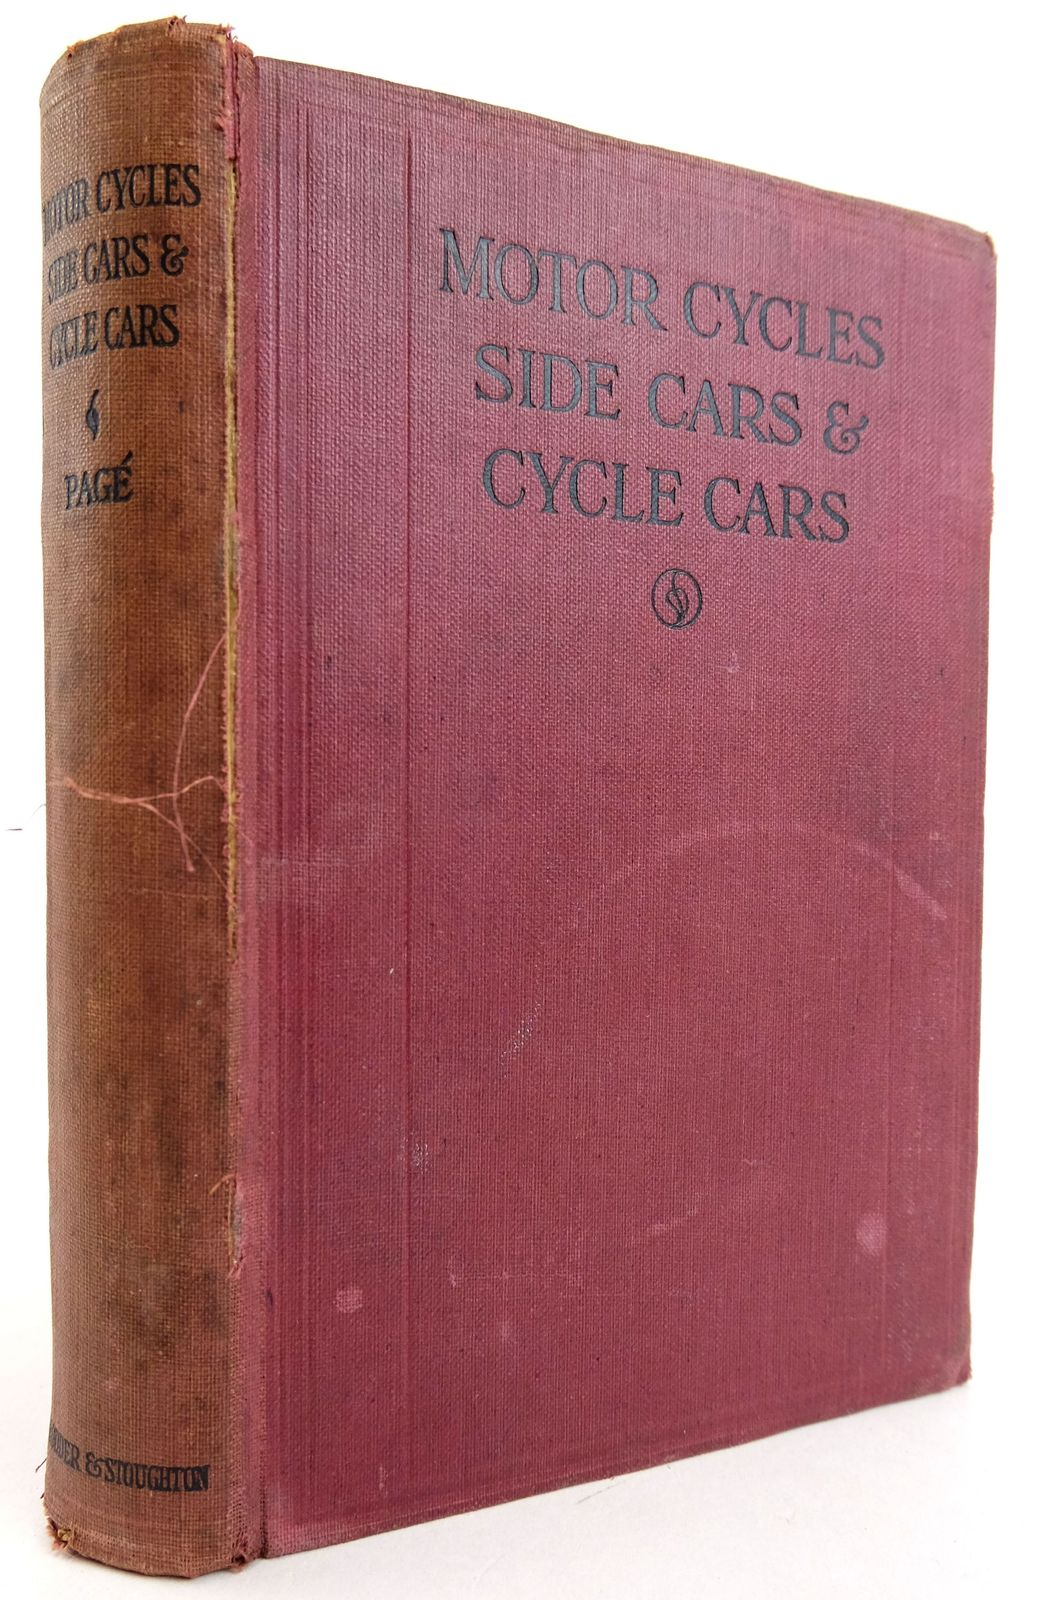 Photo of MOTORCYCLES SIDECARS AND CYCLECARS: CONSTRUCTION, MANAGEMENT, REPAIR written by Page, Victor W. published by Hodder &amp; Stoughton (STOCK CODE: 1819457)  for sale by Stella & Rose's Books